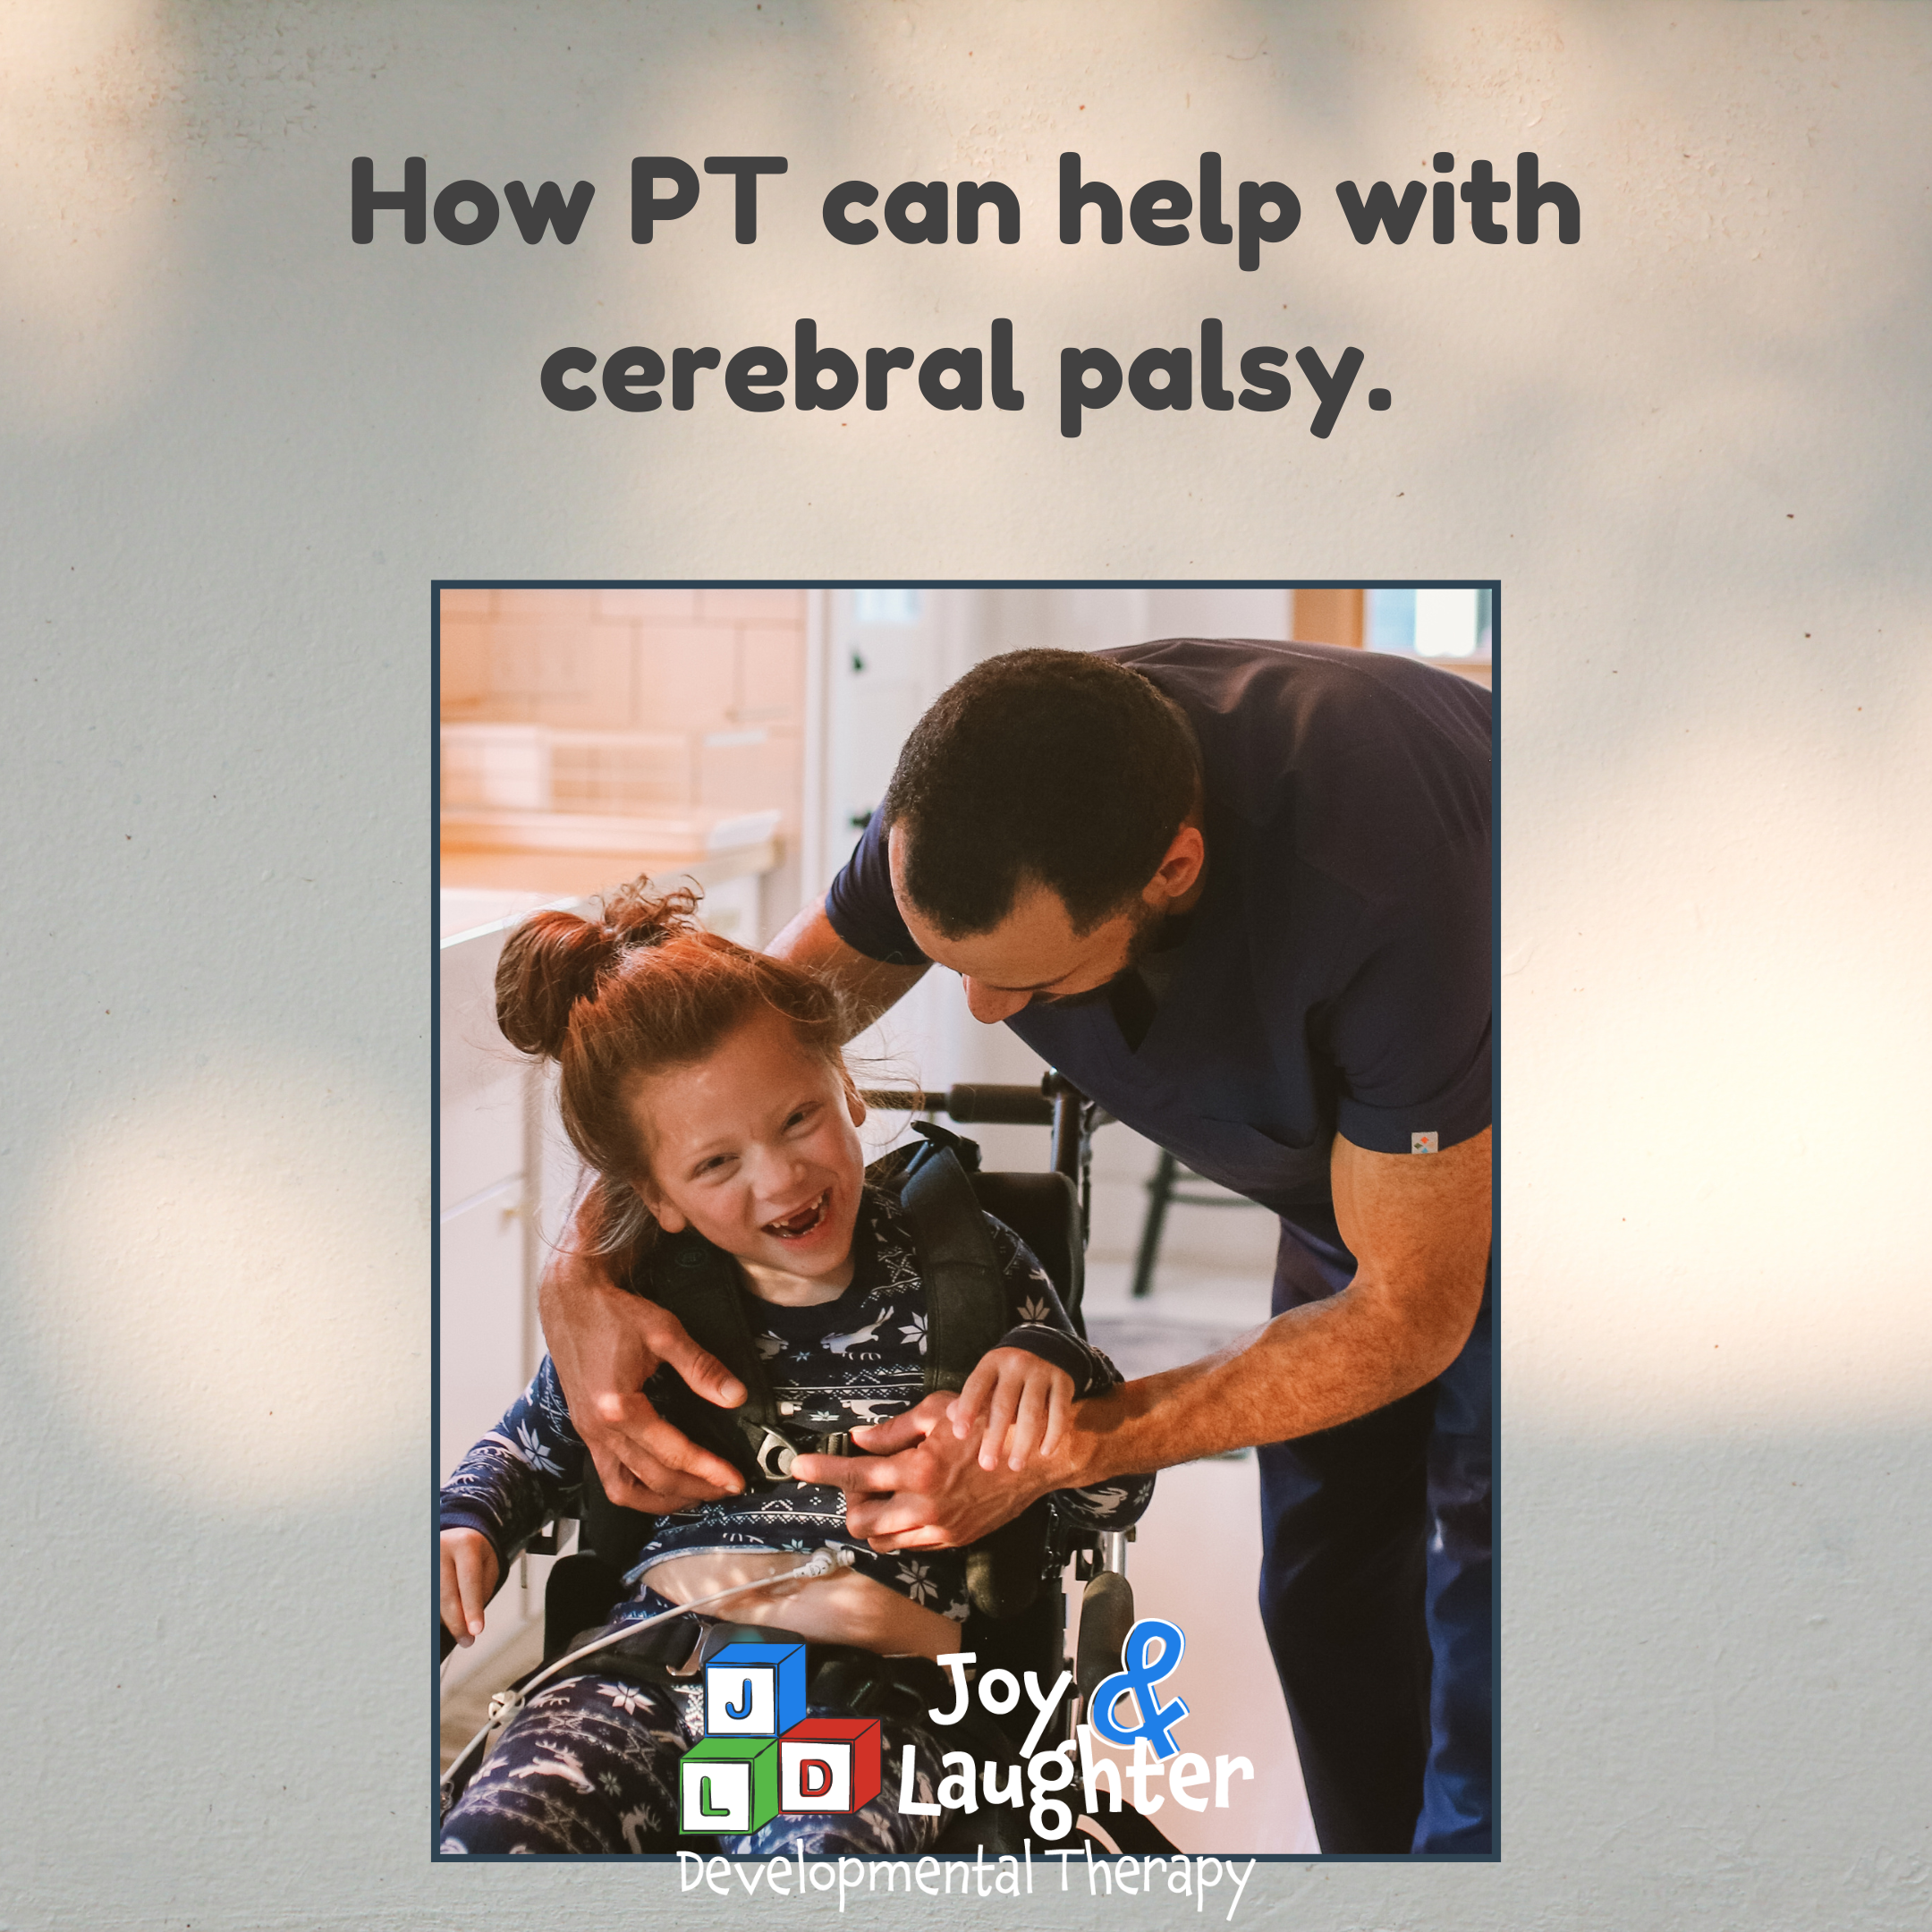 How Physical Therapy can help with Cerebral Palsy